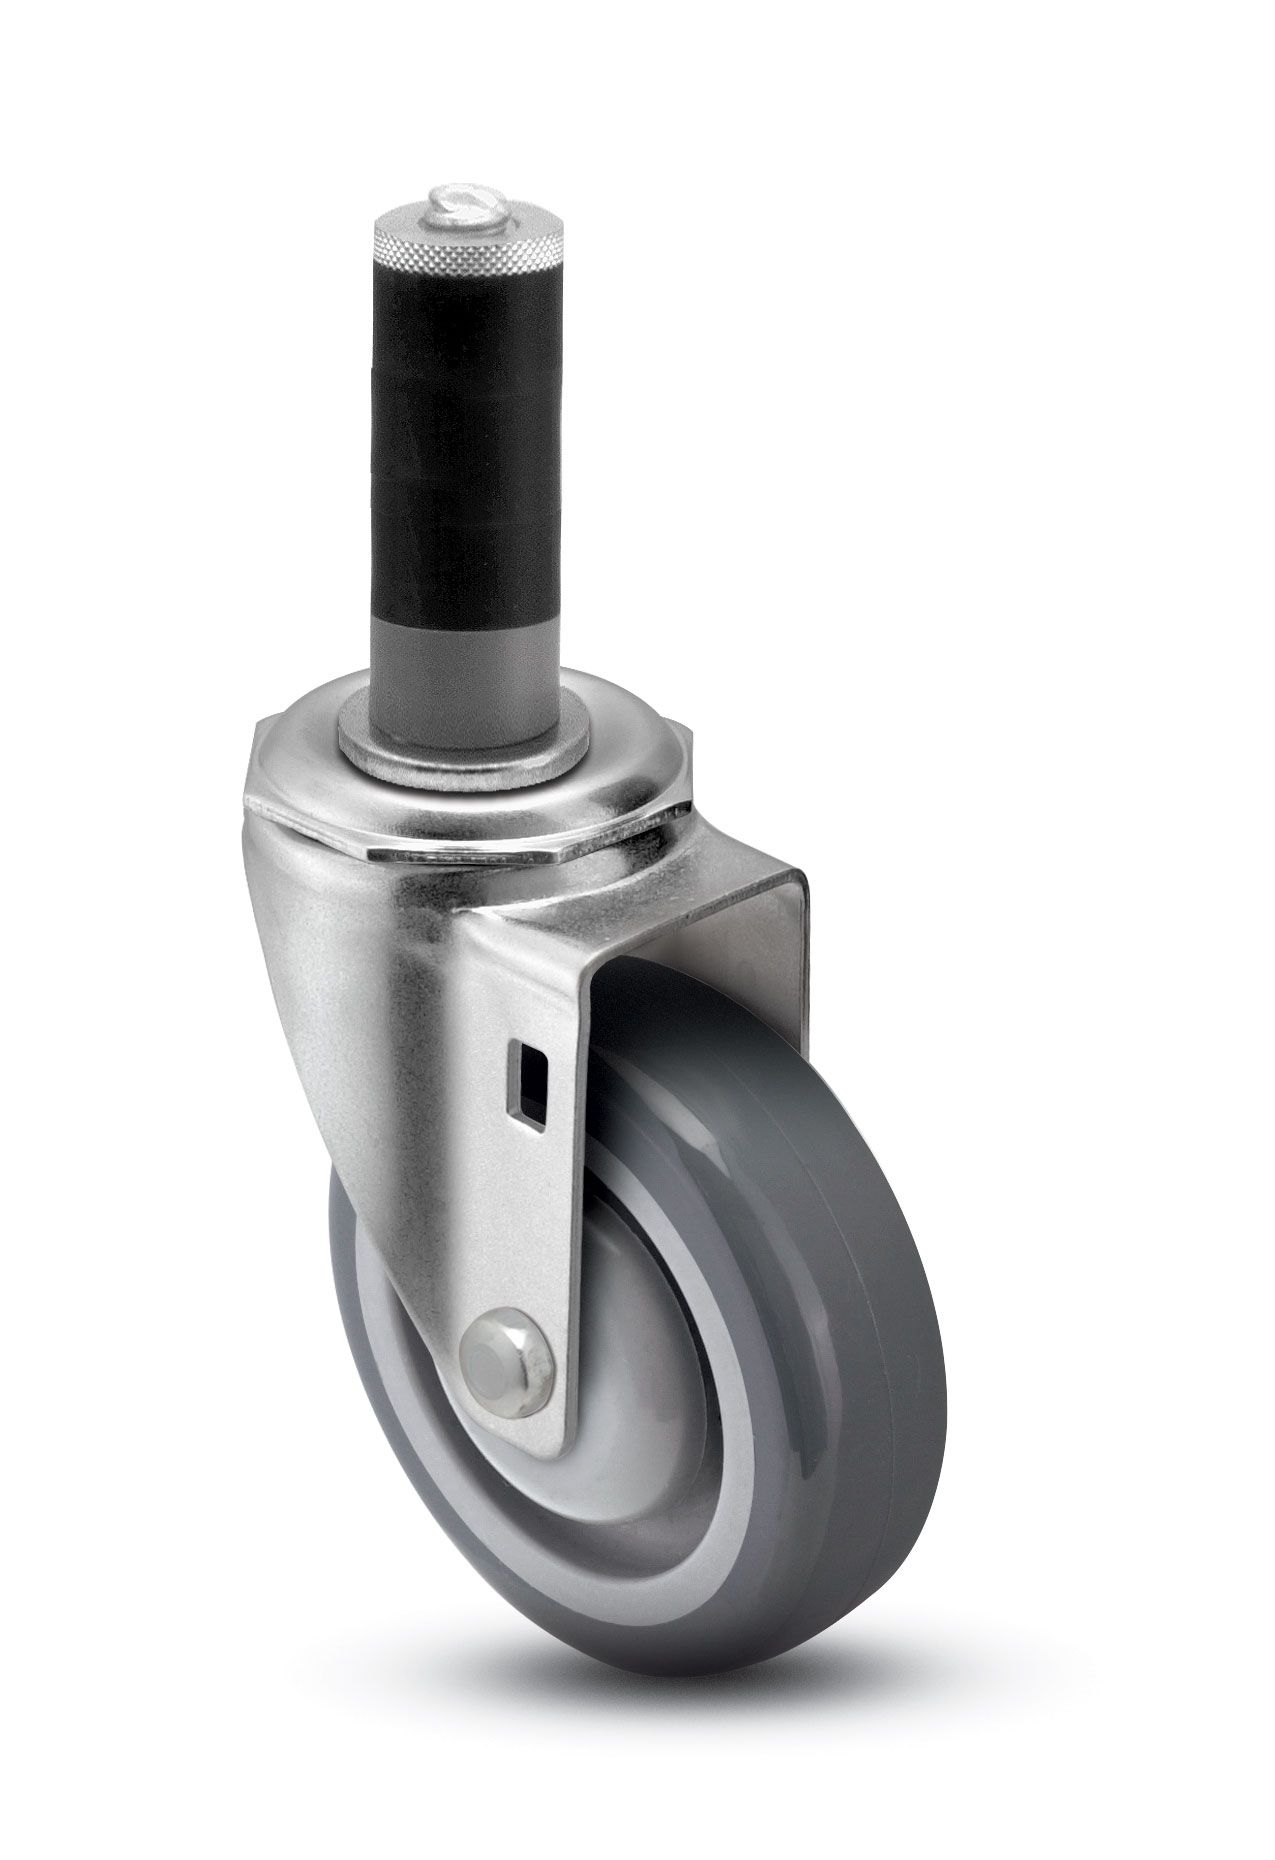 Caster; Swivel; 5" x 1-1/4"; TPR Rubber; Expandable Adapter (1-5/8" - 1-11/16" ID tubing); Zinc; Precision Ball Brng; 300#; Total Lock; Dust Cover (Item #65054)